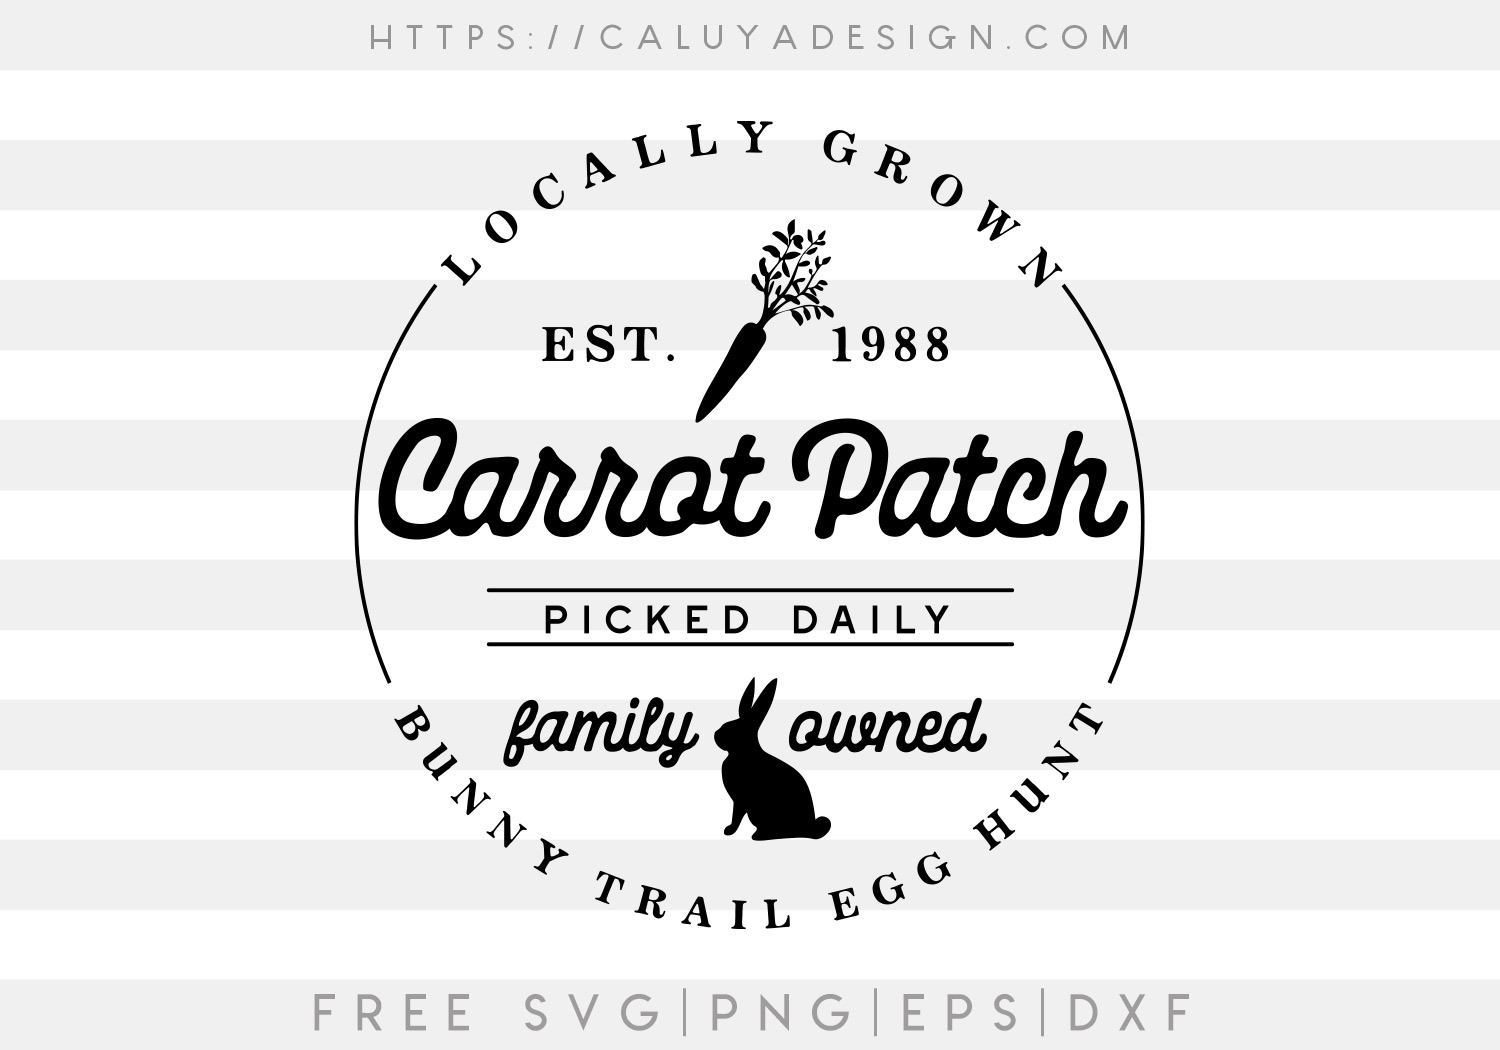 Free Carrot Patch SVG Cut File